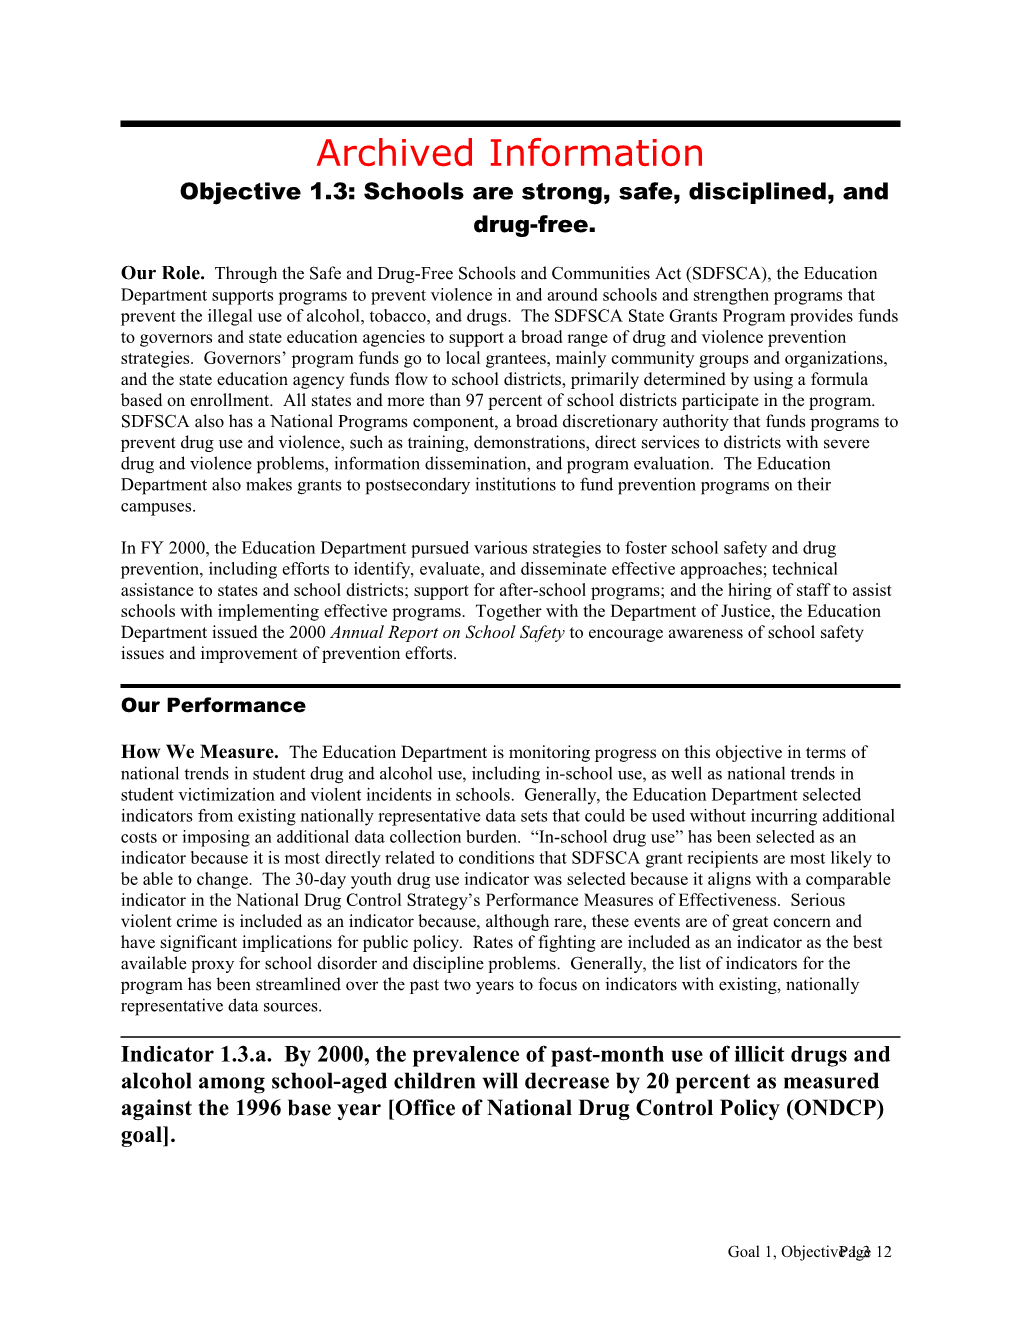 Archived: Objective 1.3: Schools Are Strong, Safe, Disciplined and Drug-Free